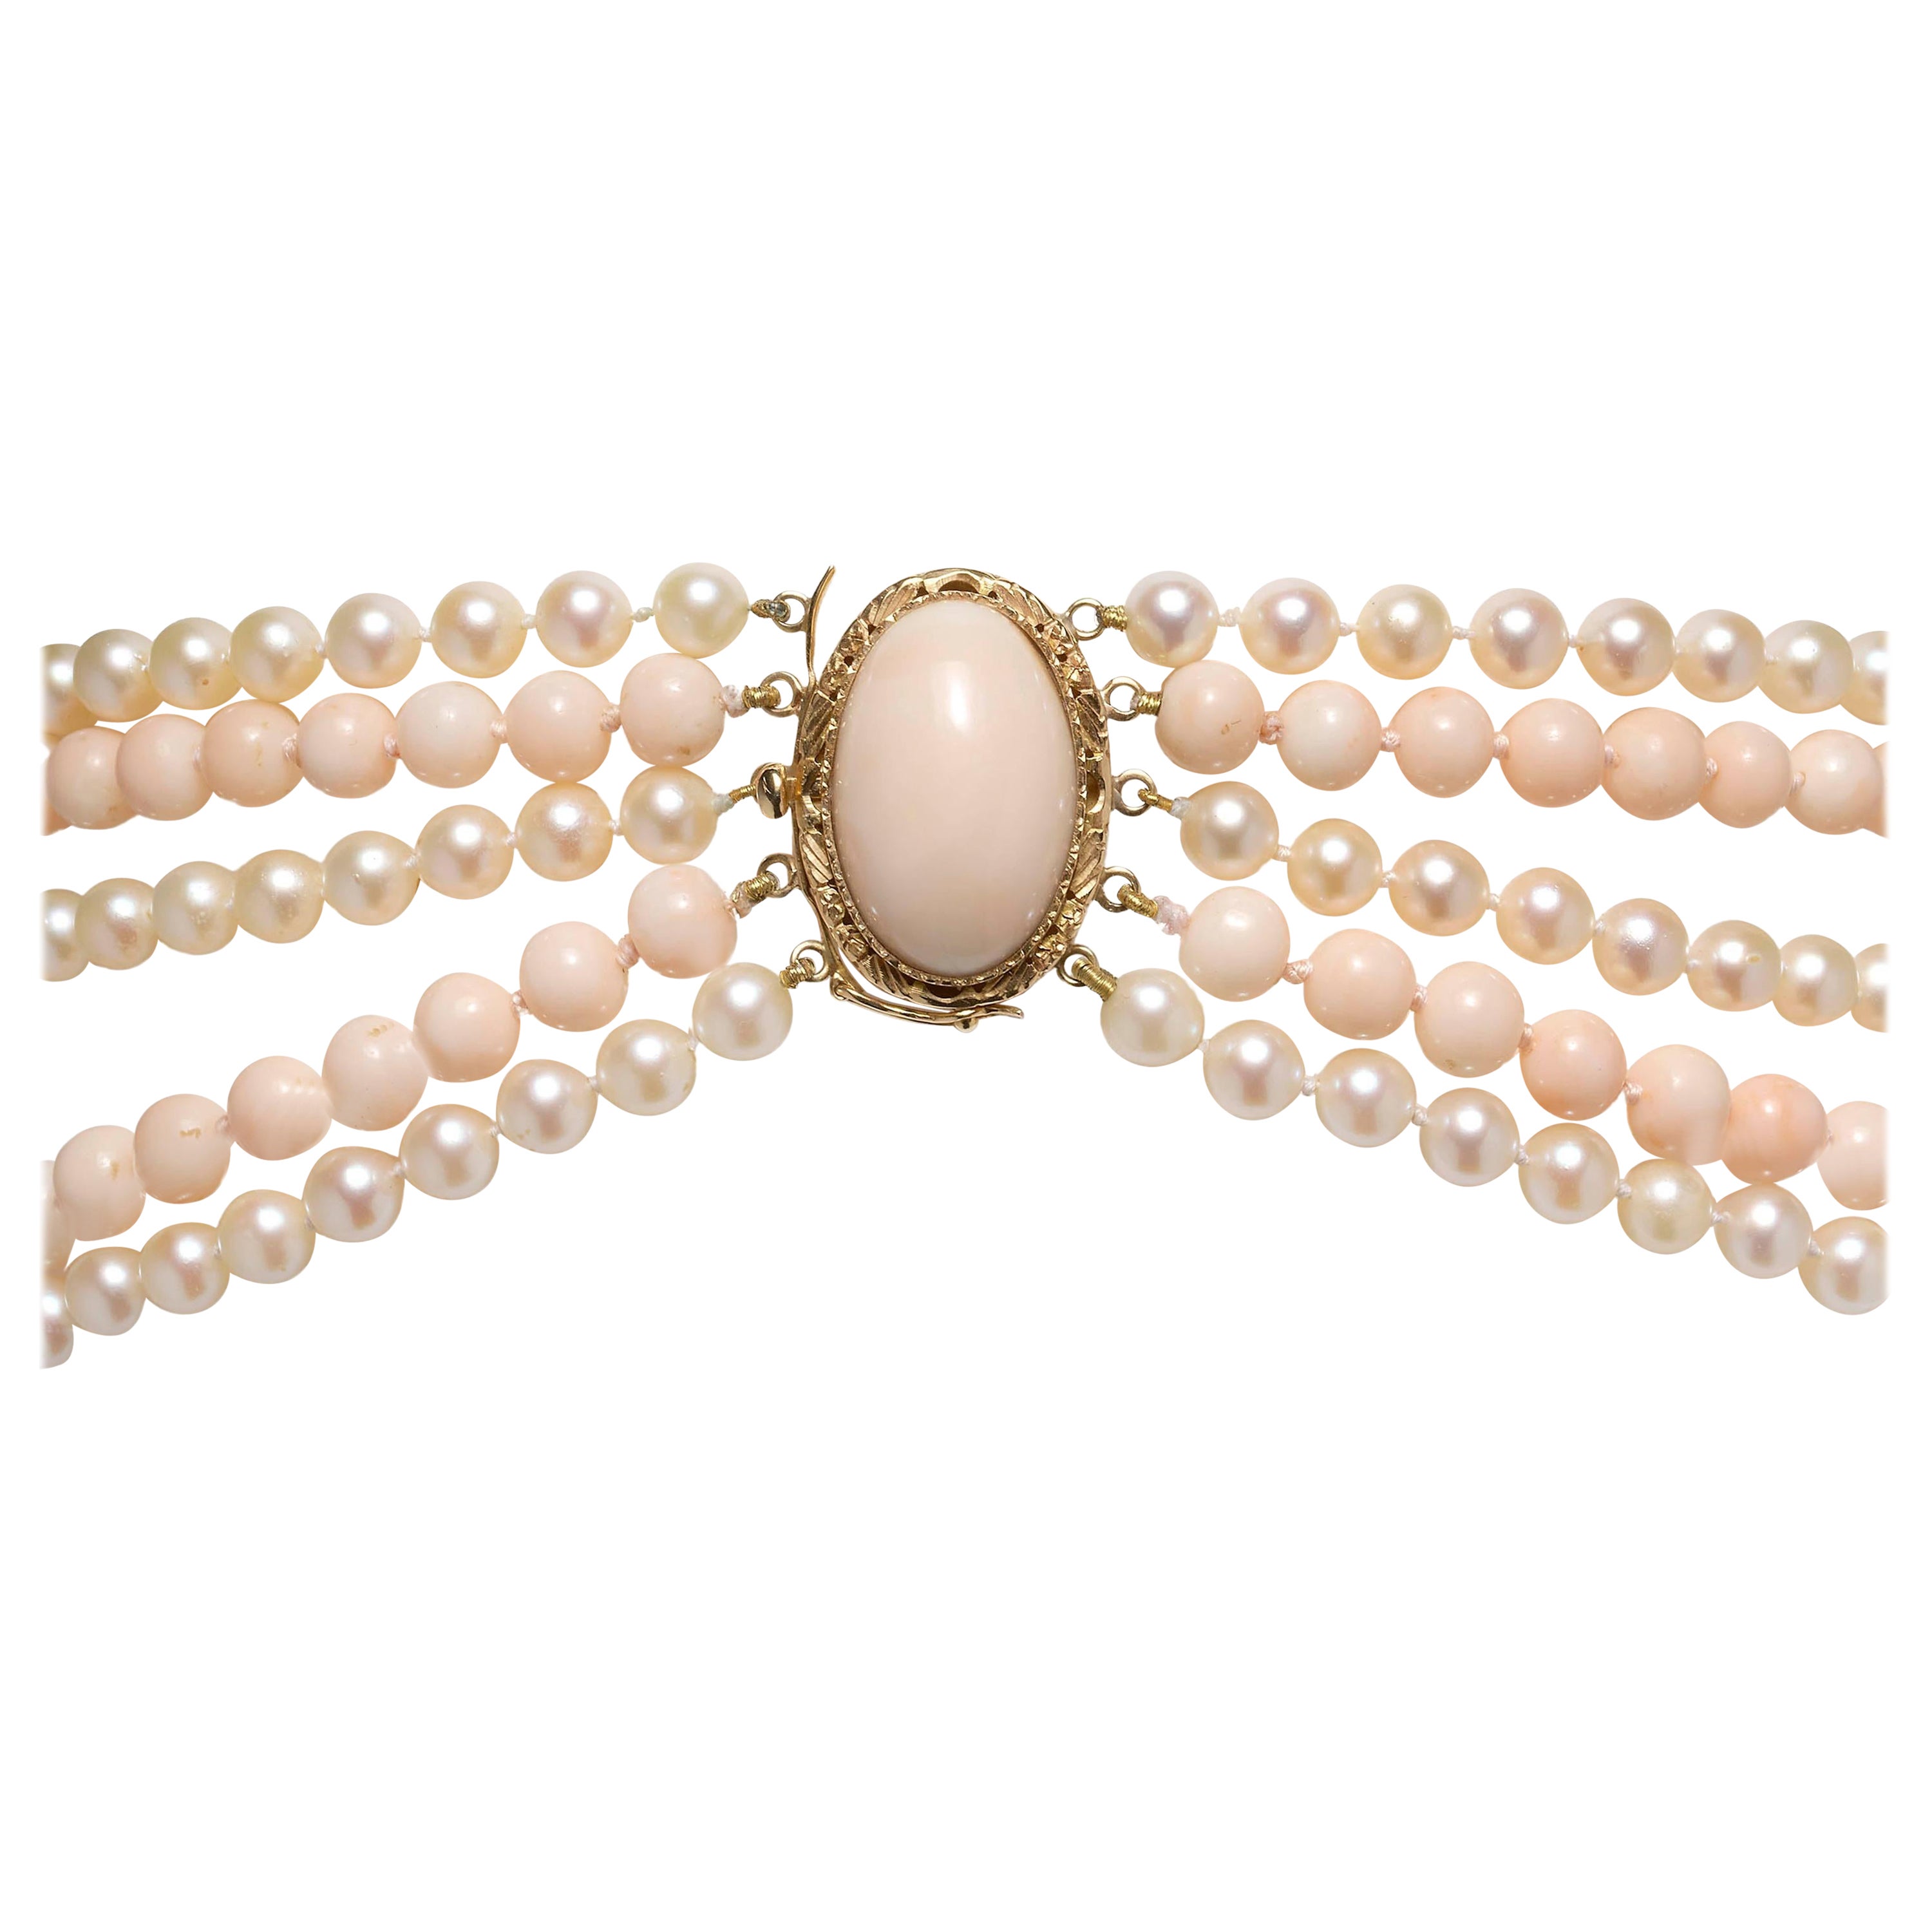 Vintage Coral and Cultured Pearl Five Row Necklace, Circa 1970